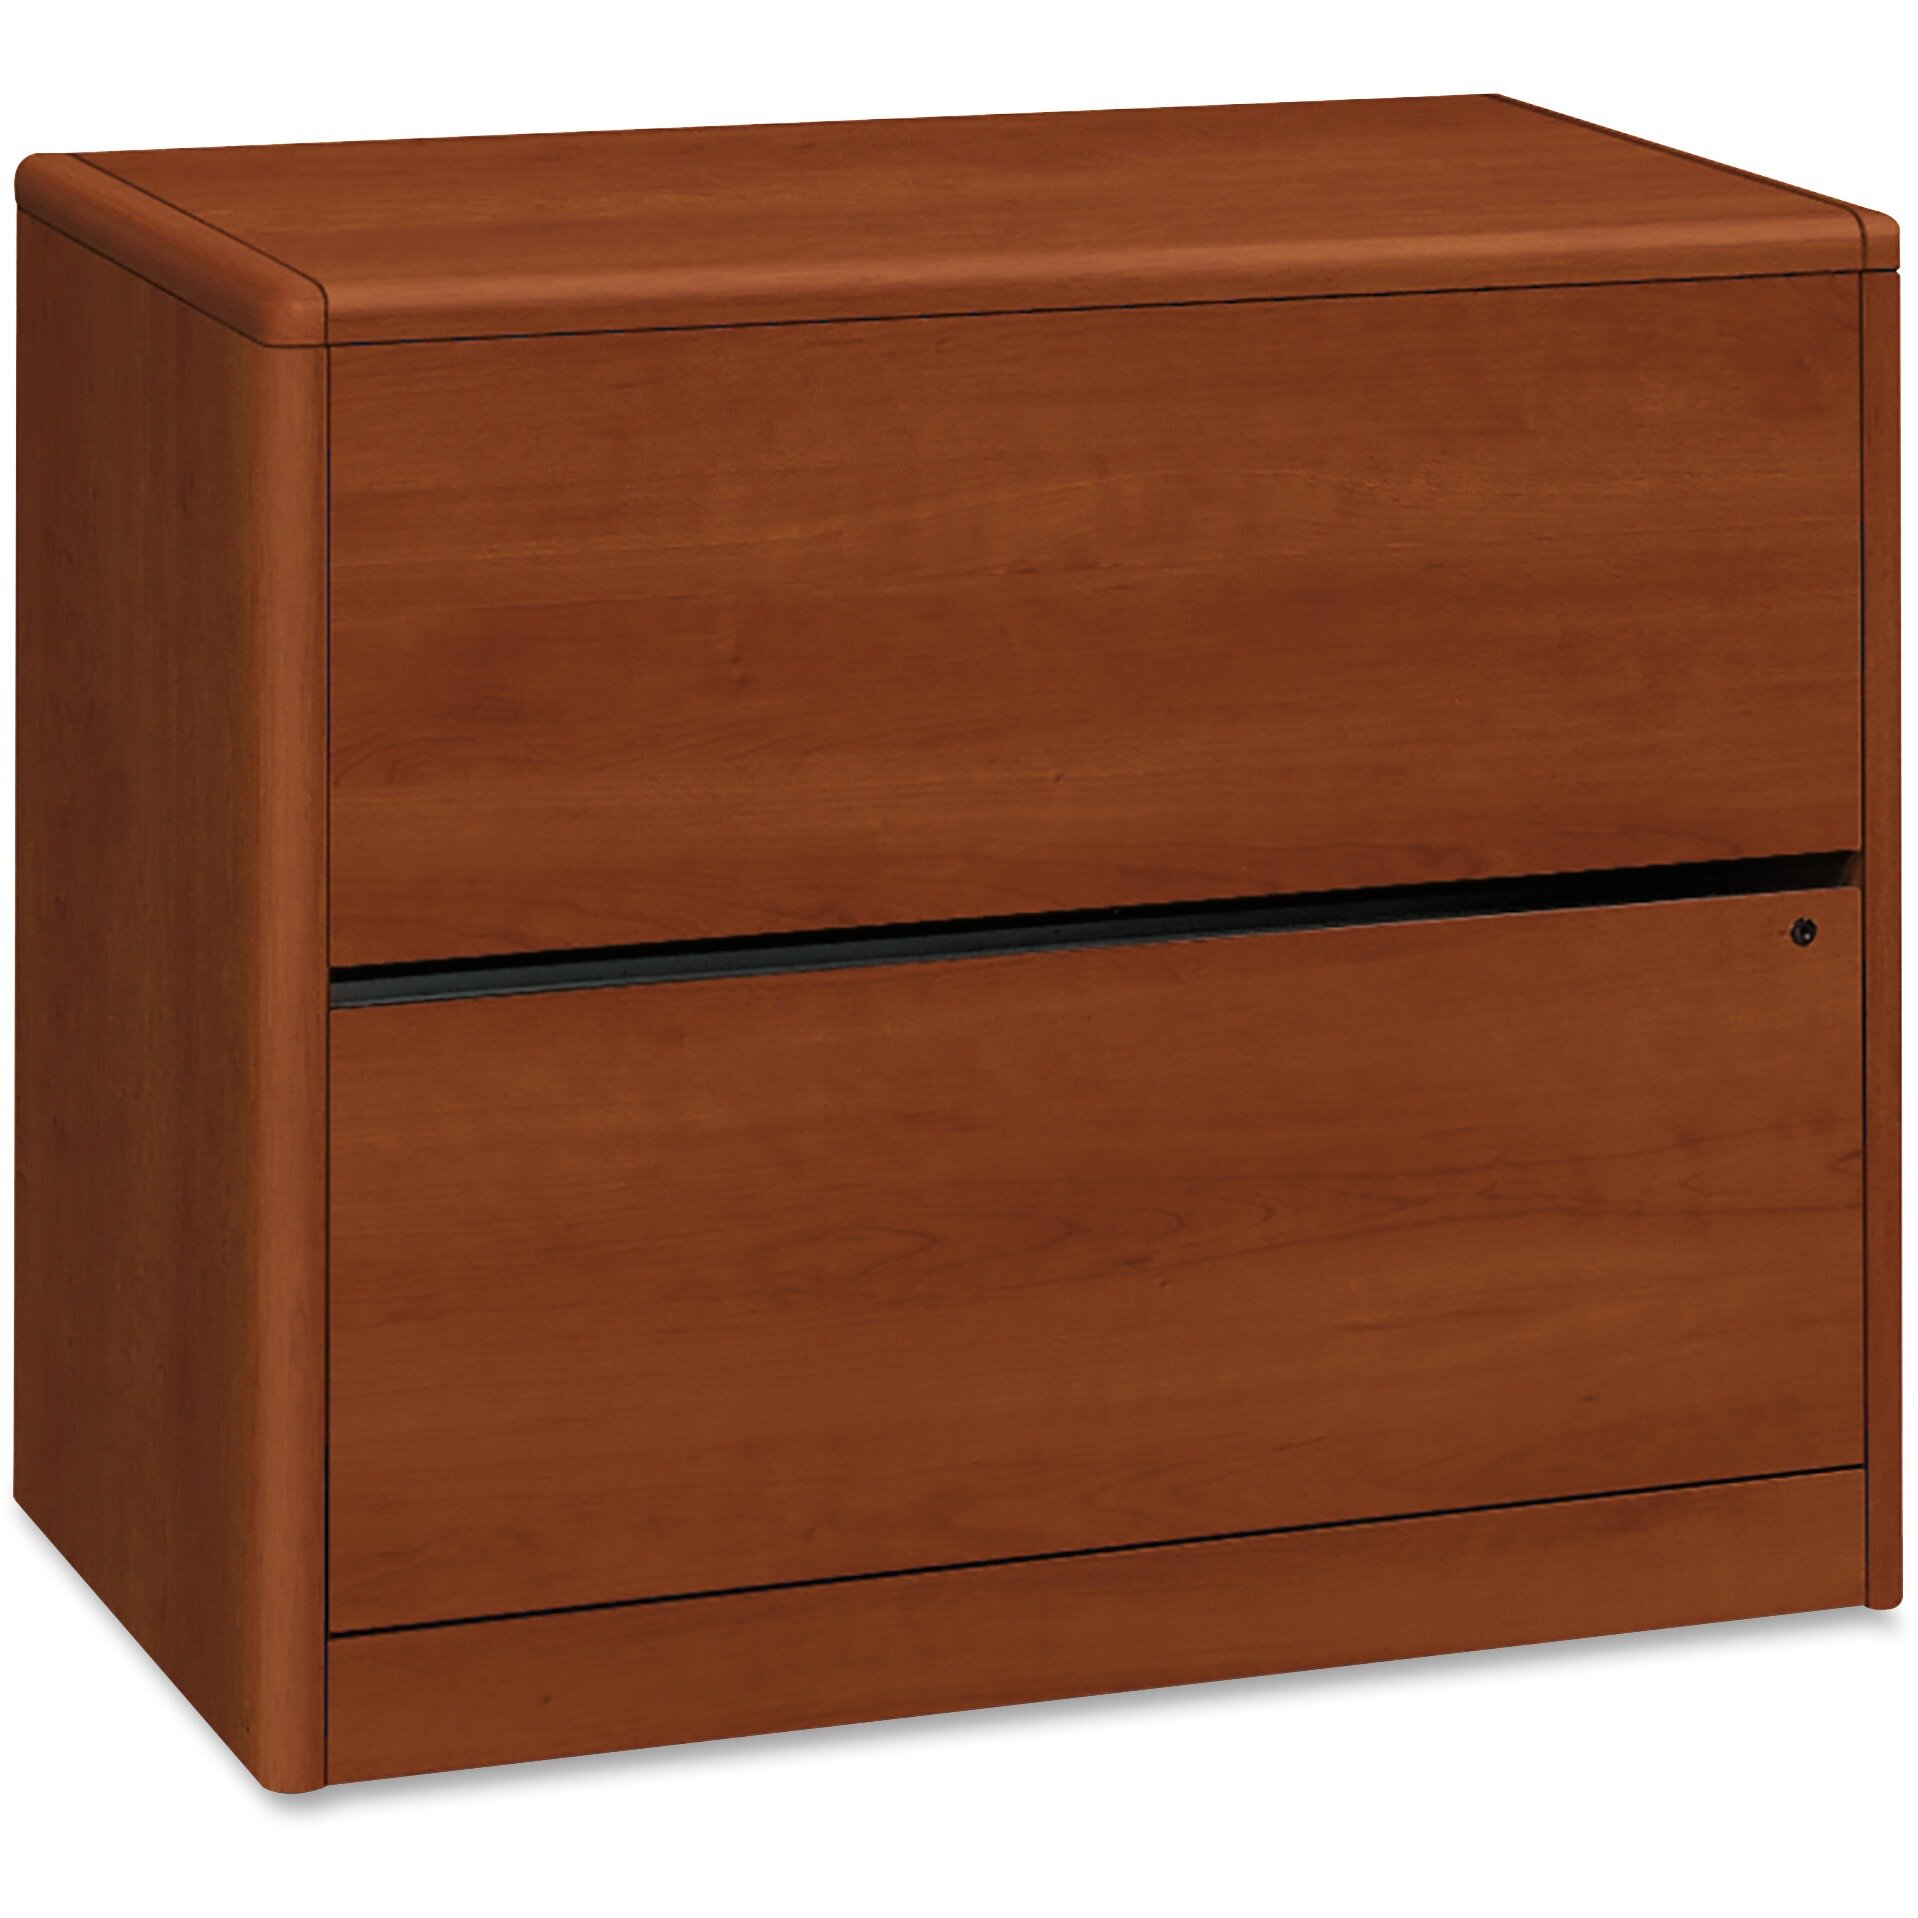 Hon 10700 Series 2 Drawer Lateral Filing Cabinet